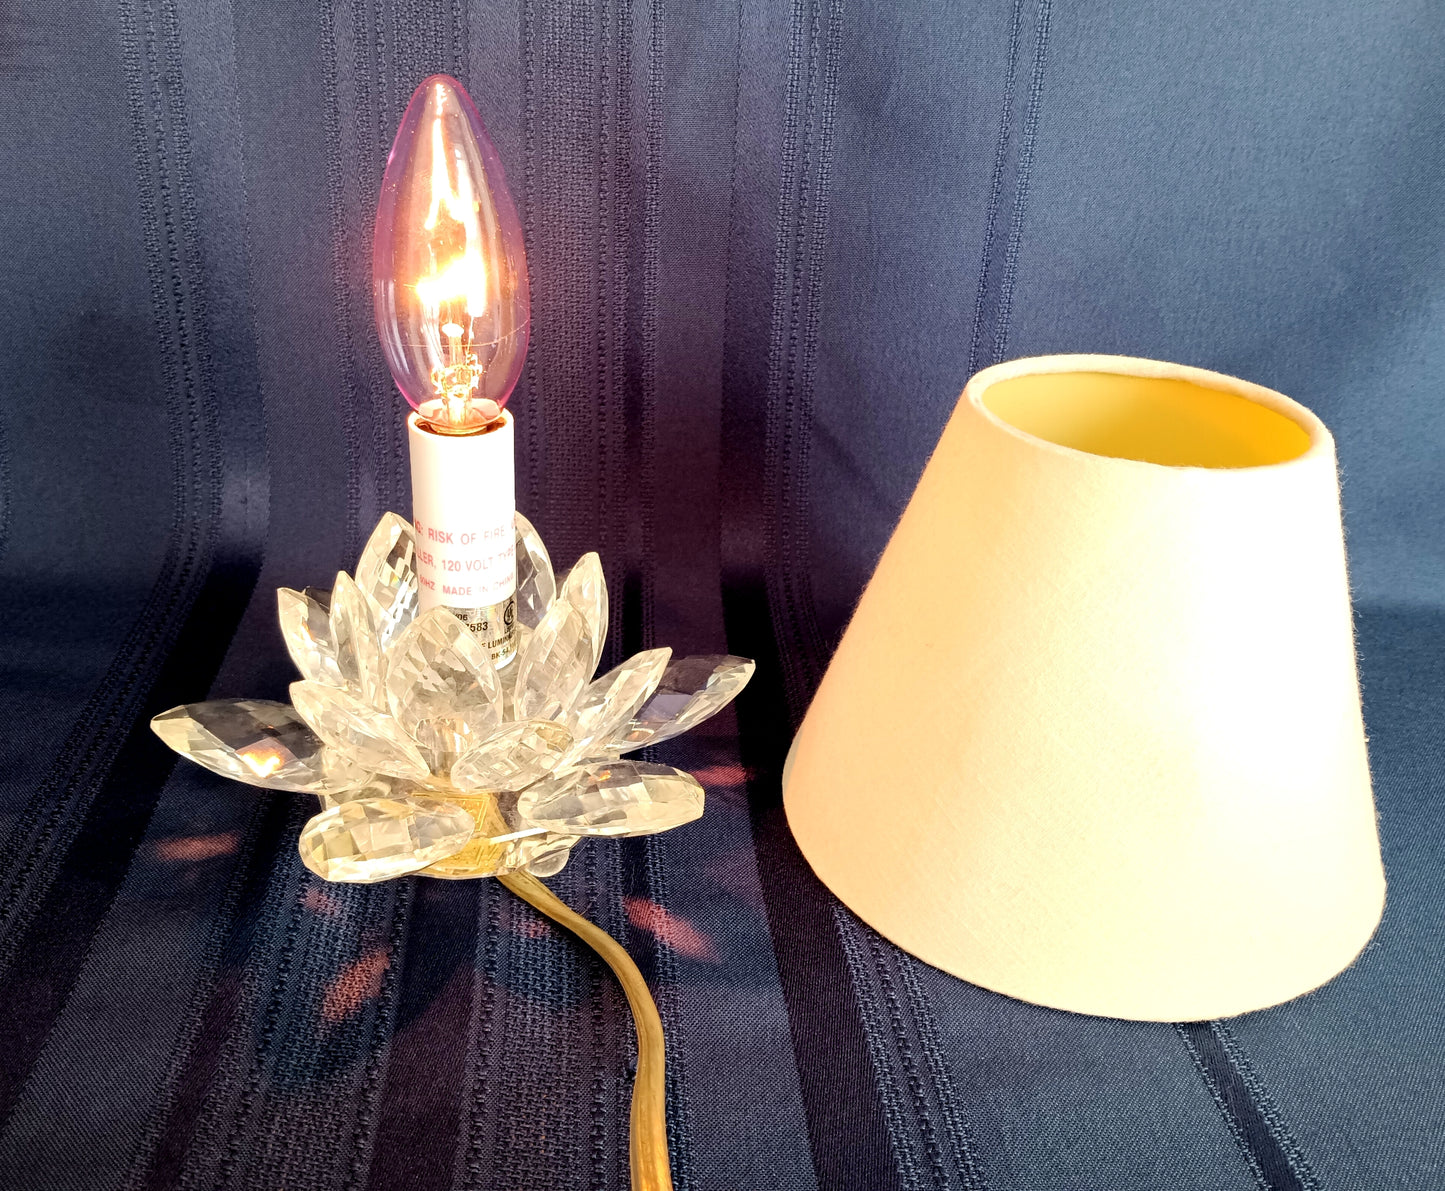 Vintage Fifth Avenue Crystal LTD Small Lamp Lotus Shaped Clear Crystal Glass w/Fabric Shade Footed In Cord Switch Elegant Table Lamp